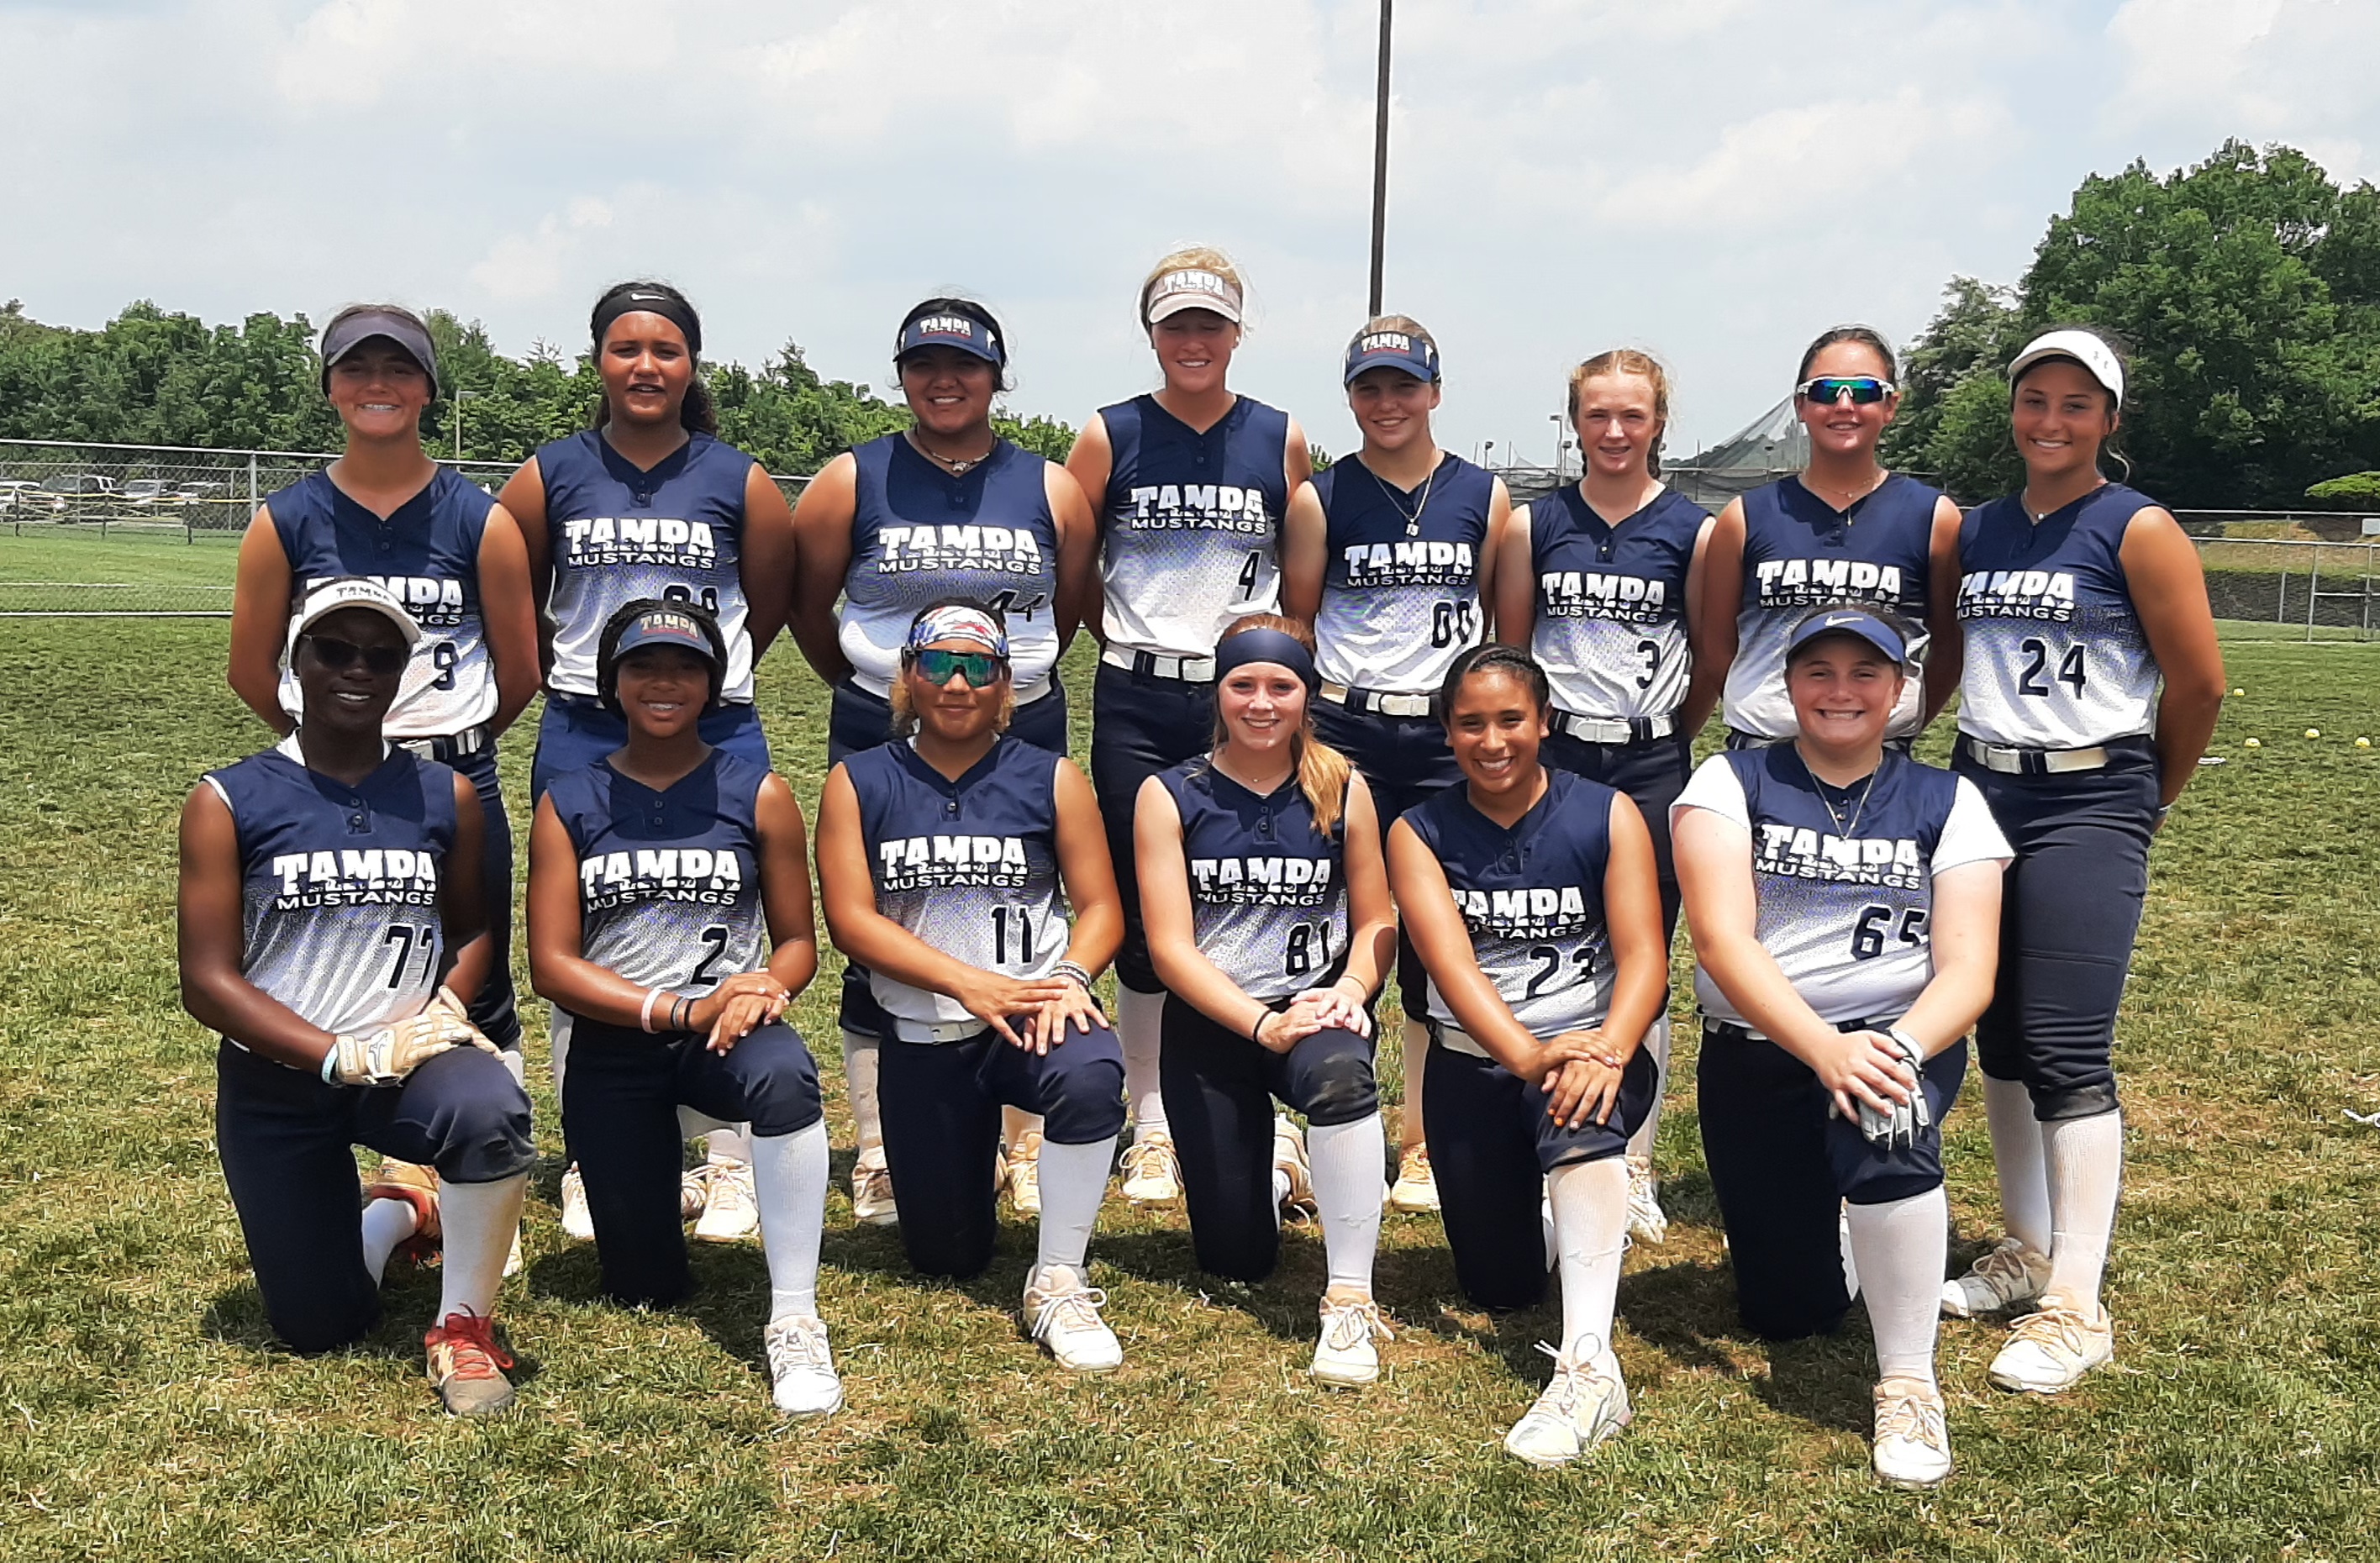 Tampa Mustangs Bell Finishes 5th at USA Nationals 